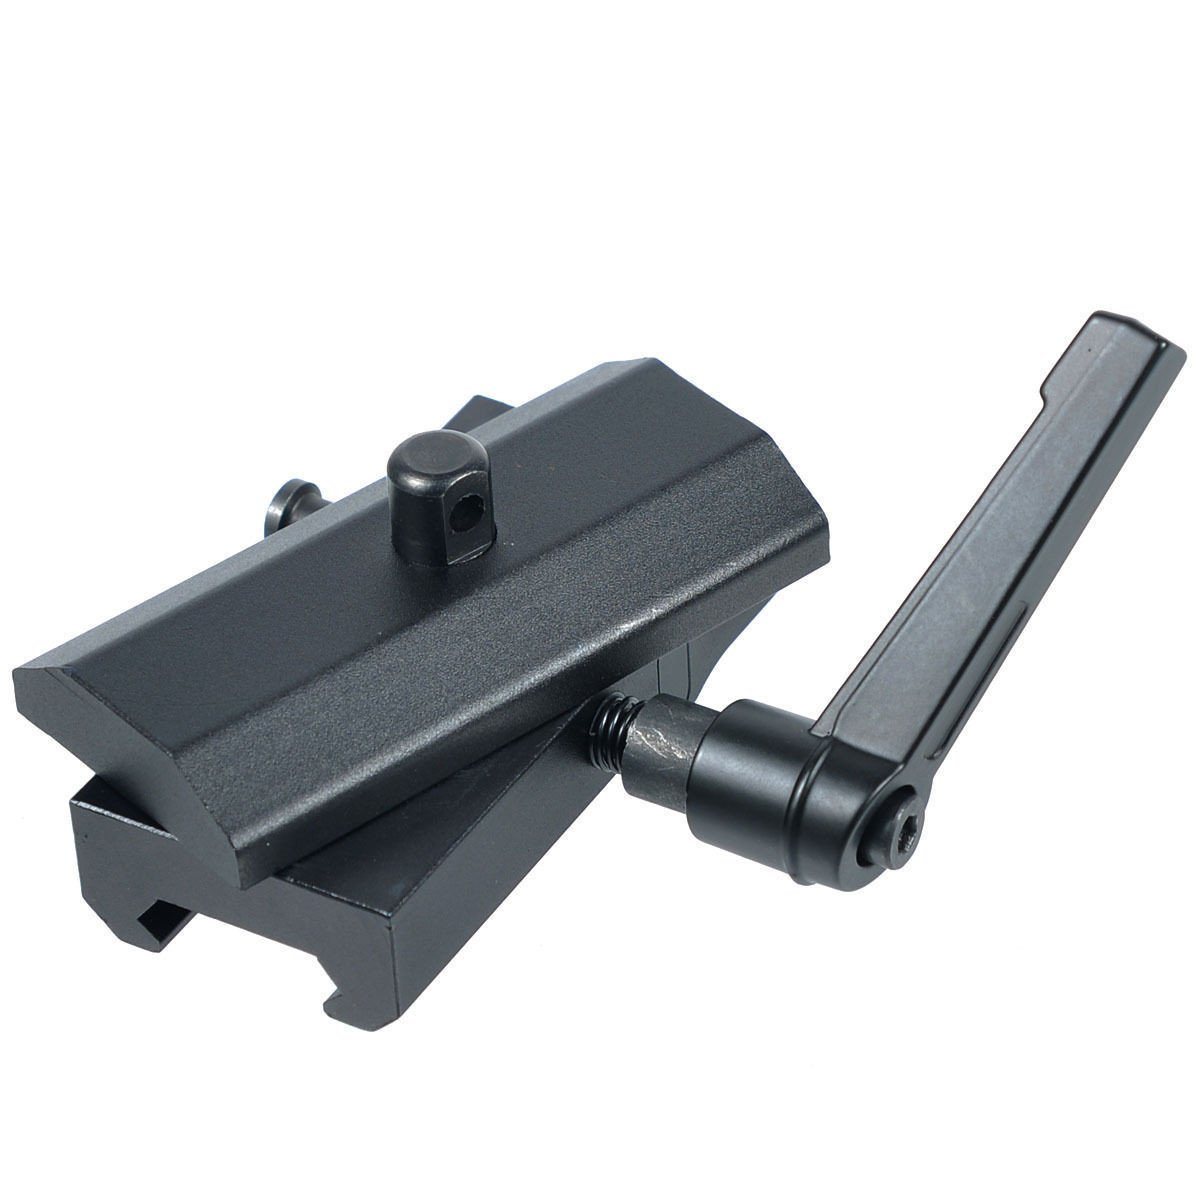 Rotating Quick Detachable Bipod Adapter for Picatinny Rails Bipods &amp; Monopods Unbranded 